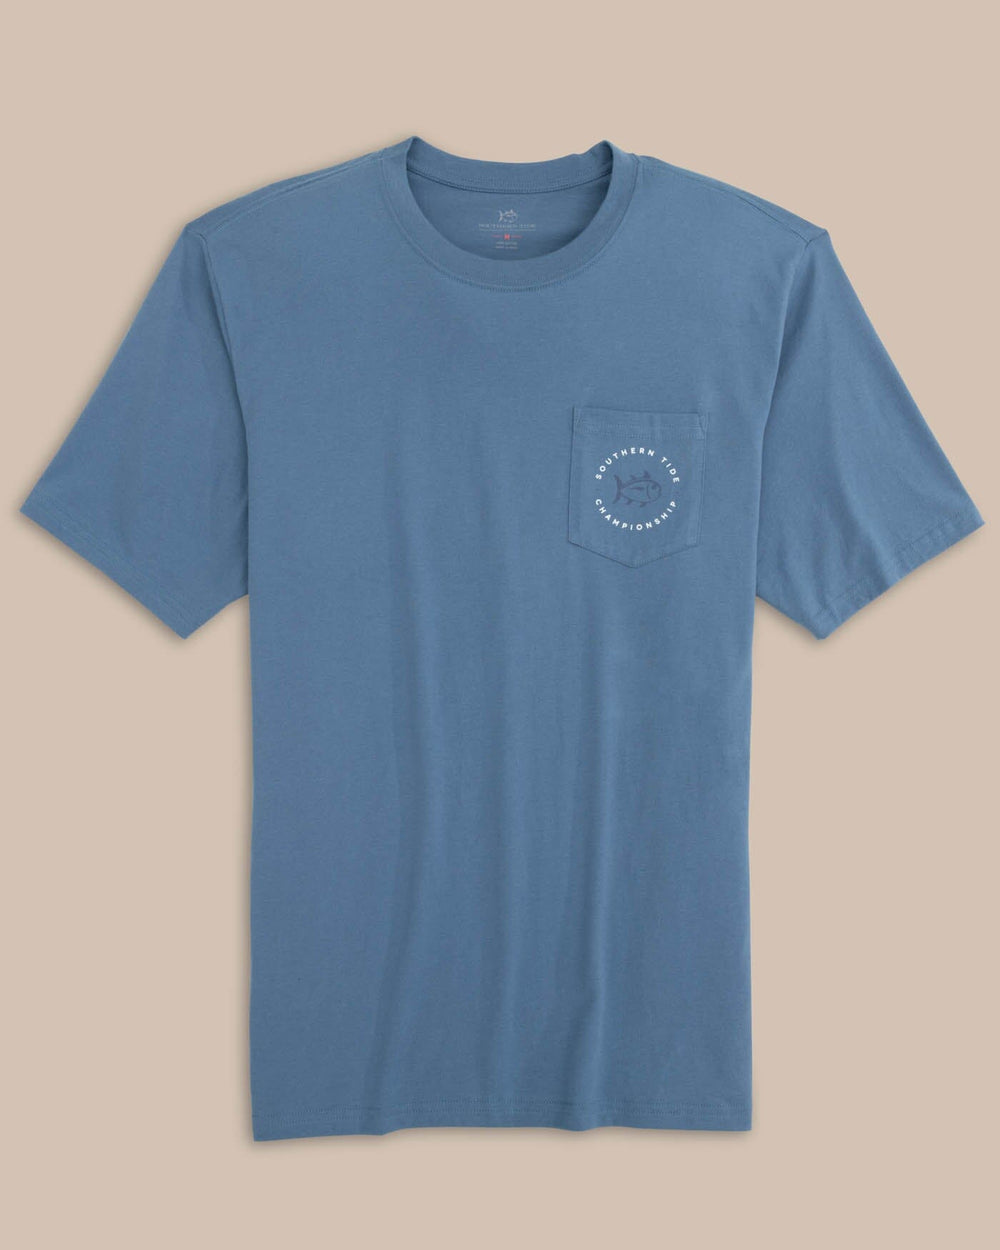 The front view of the Southern Tide ST Championship Short Sleeve T-Shirt by Southern Tide - Coronet Blue